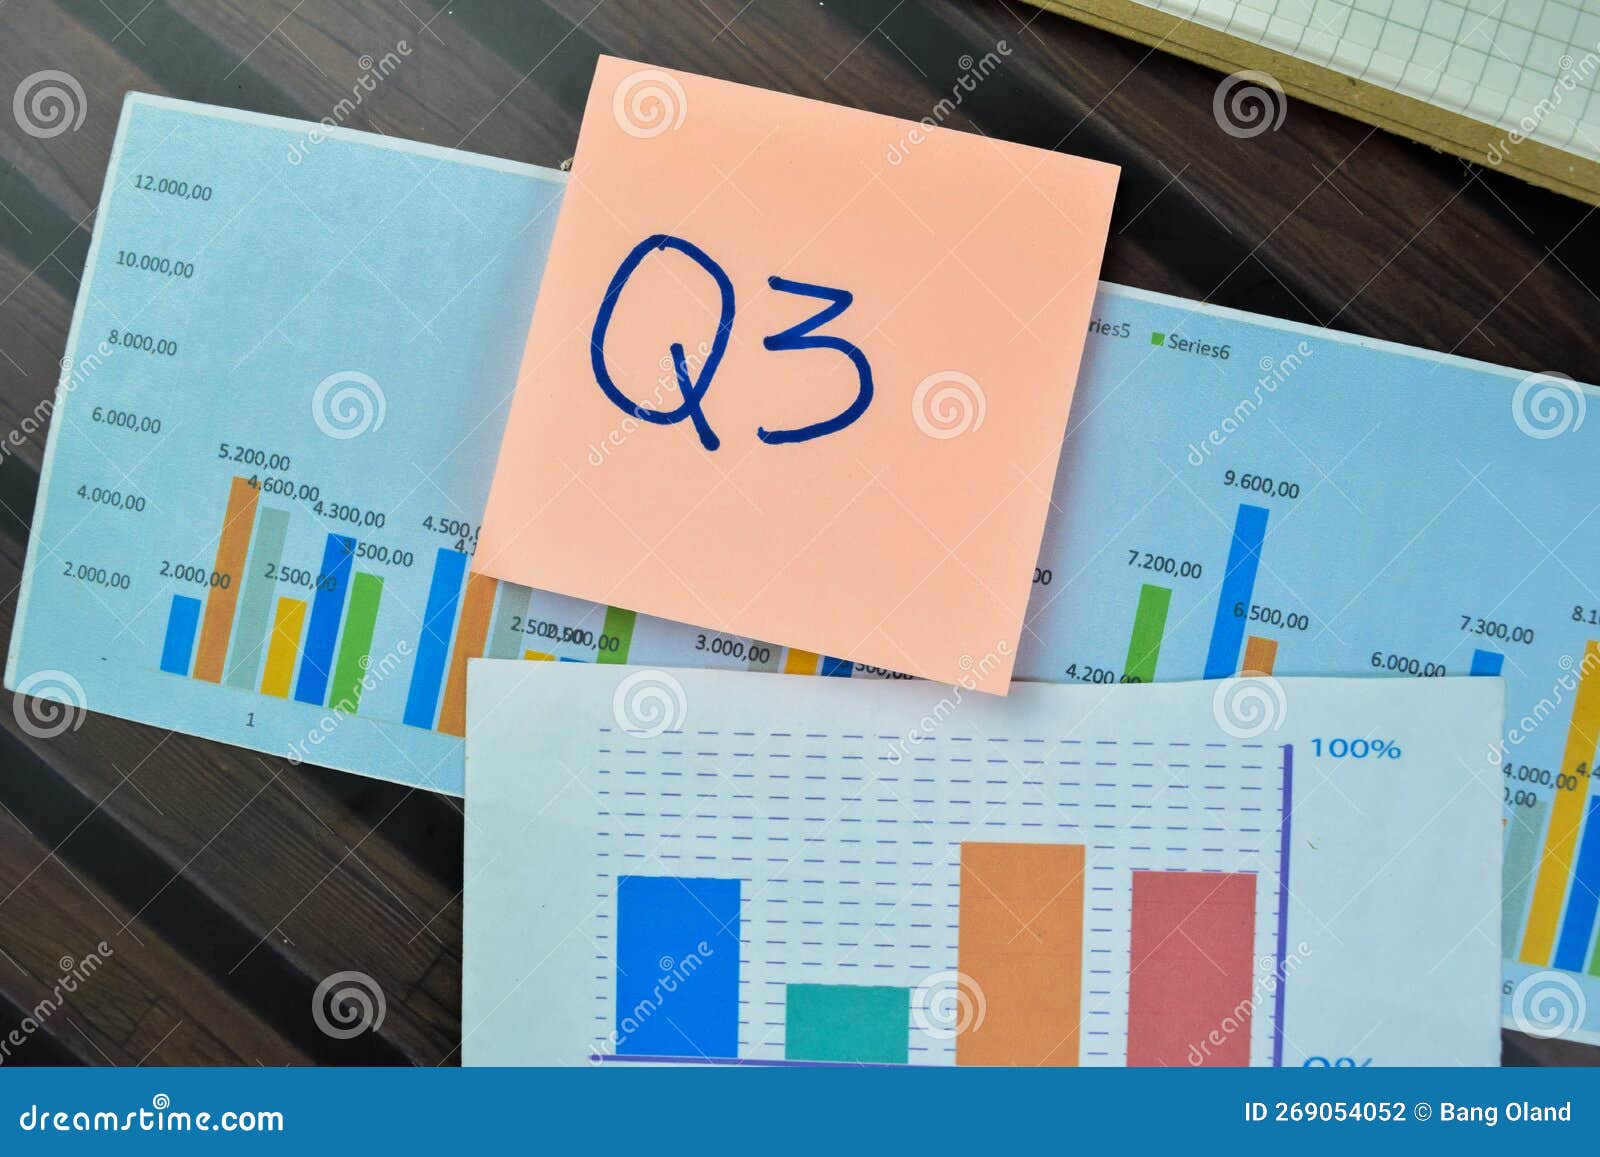 concept of q3 - 3rd quarter period write on sticky notes  on wooden table